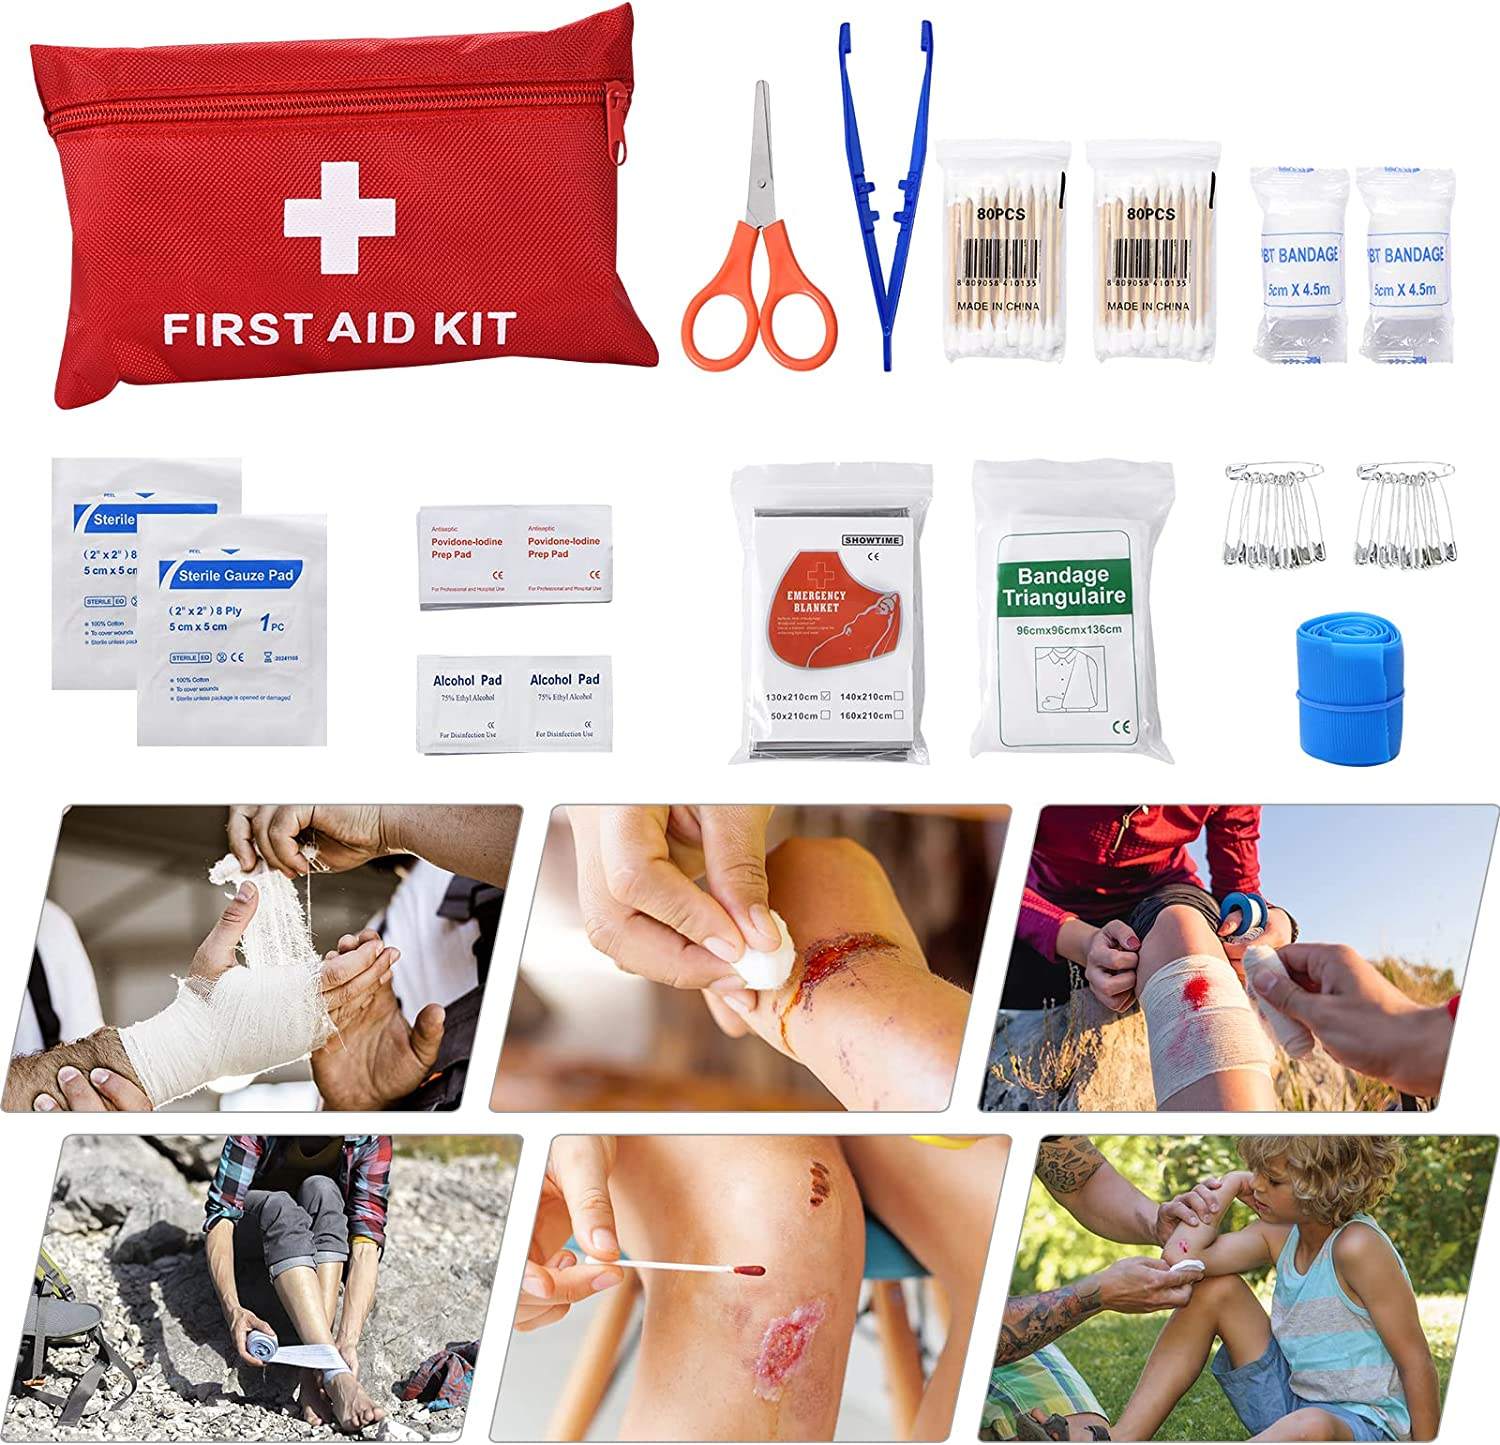 HARDLAND Emergency Survival Kit And First Aid Kit